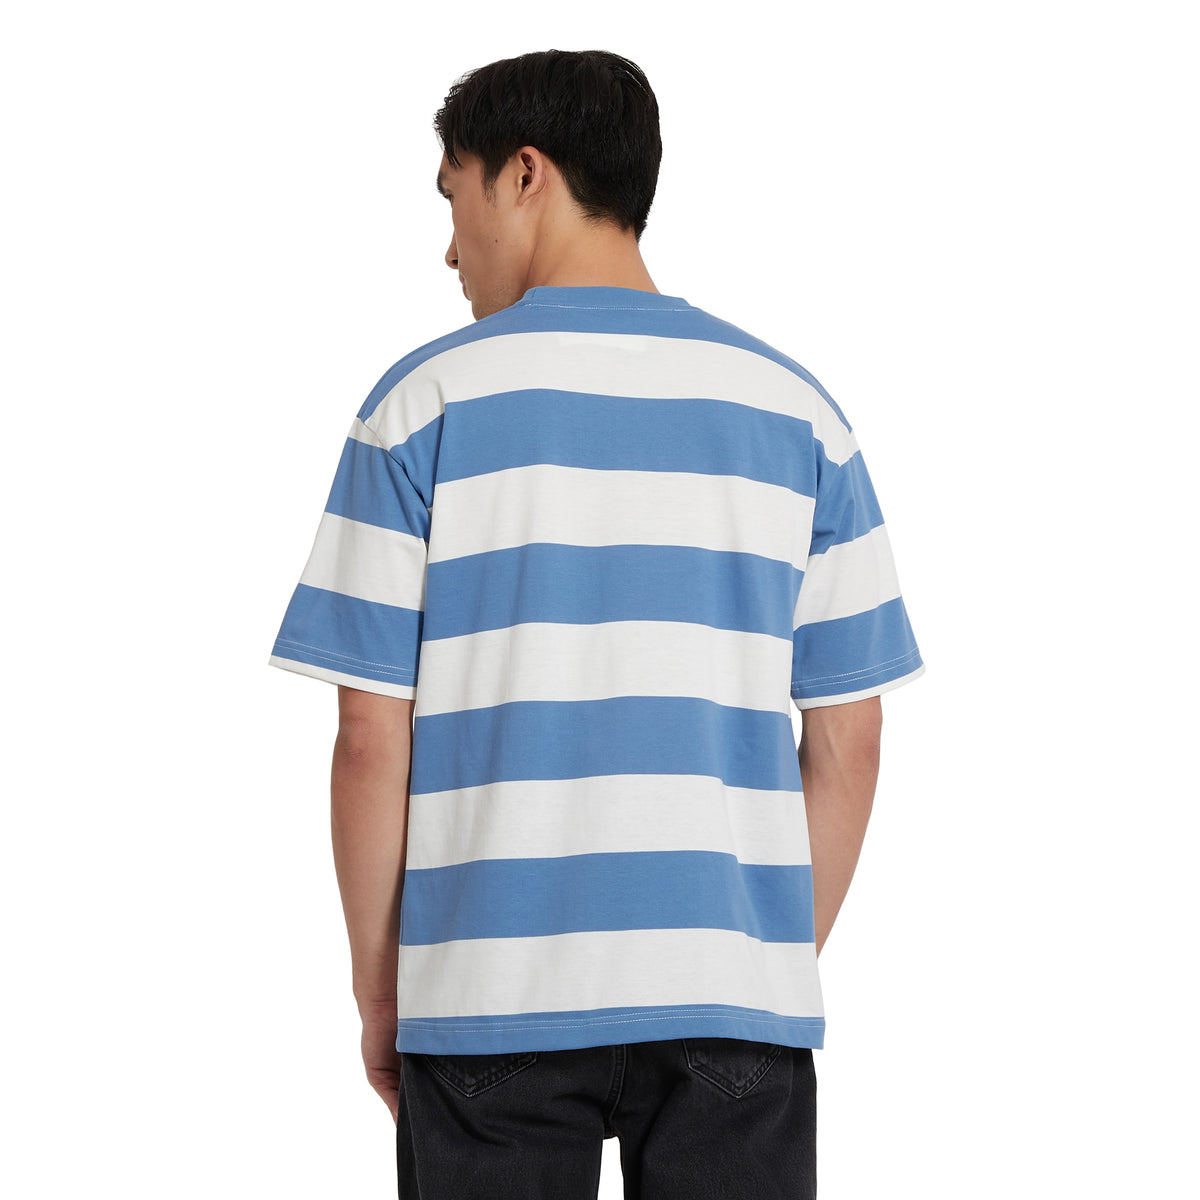 Cubic Men Basic Stripes  Oversized Boxy Tee / Box Fit T shirt Top Top for Men - CMBOS04R